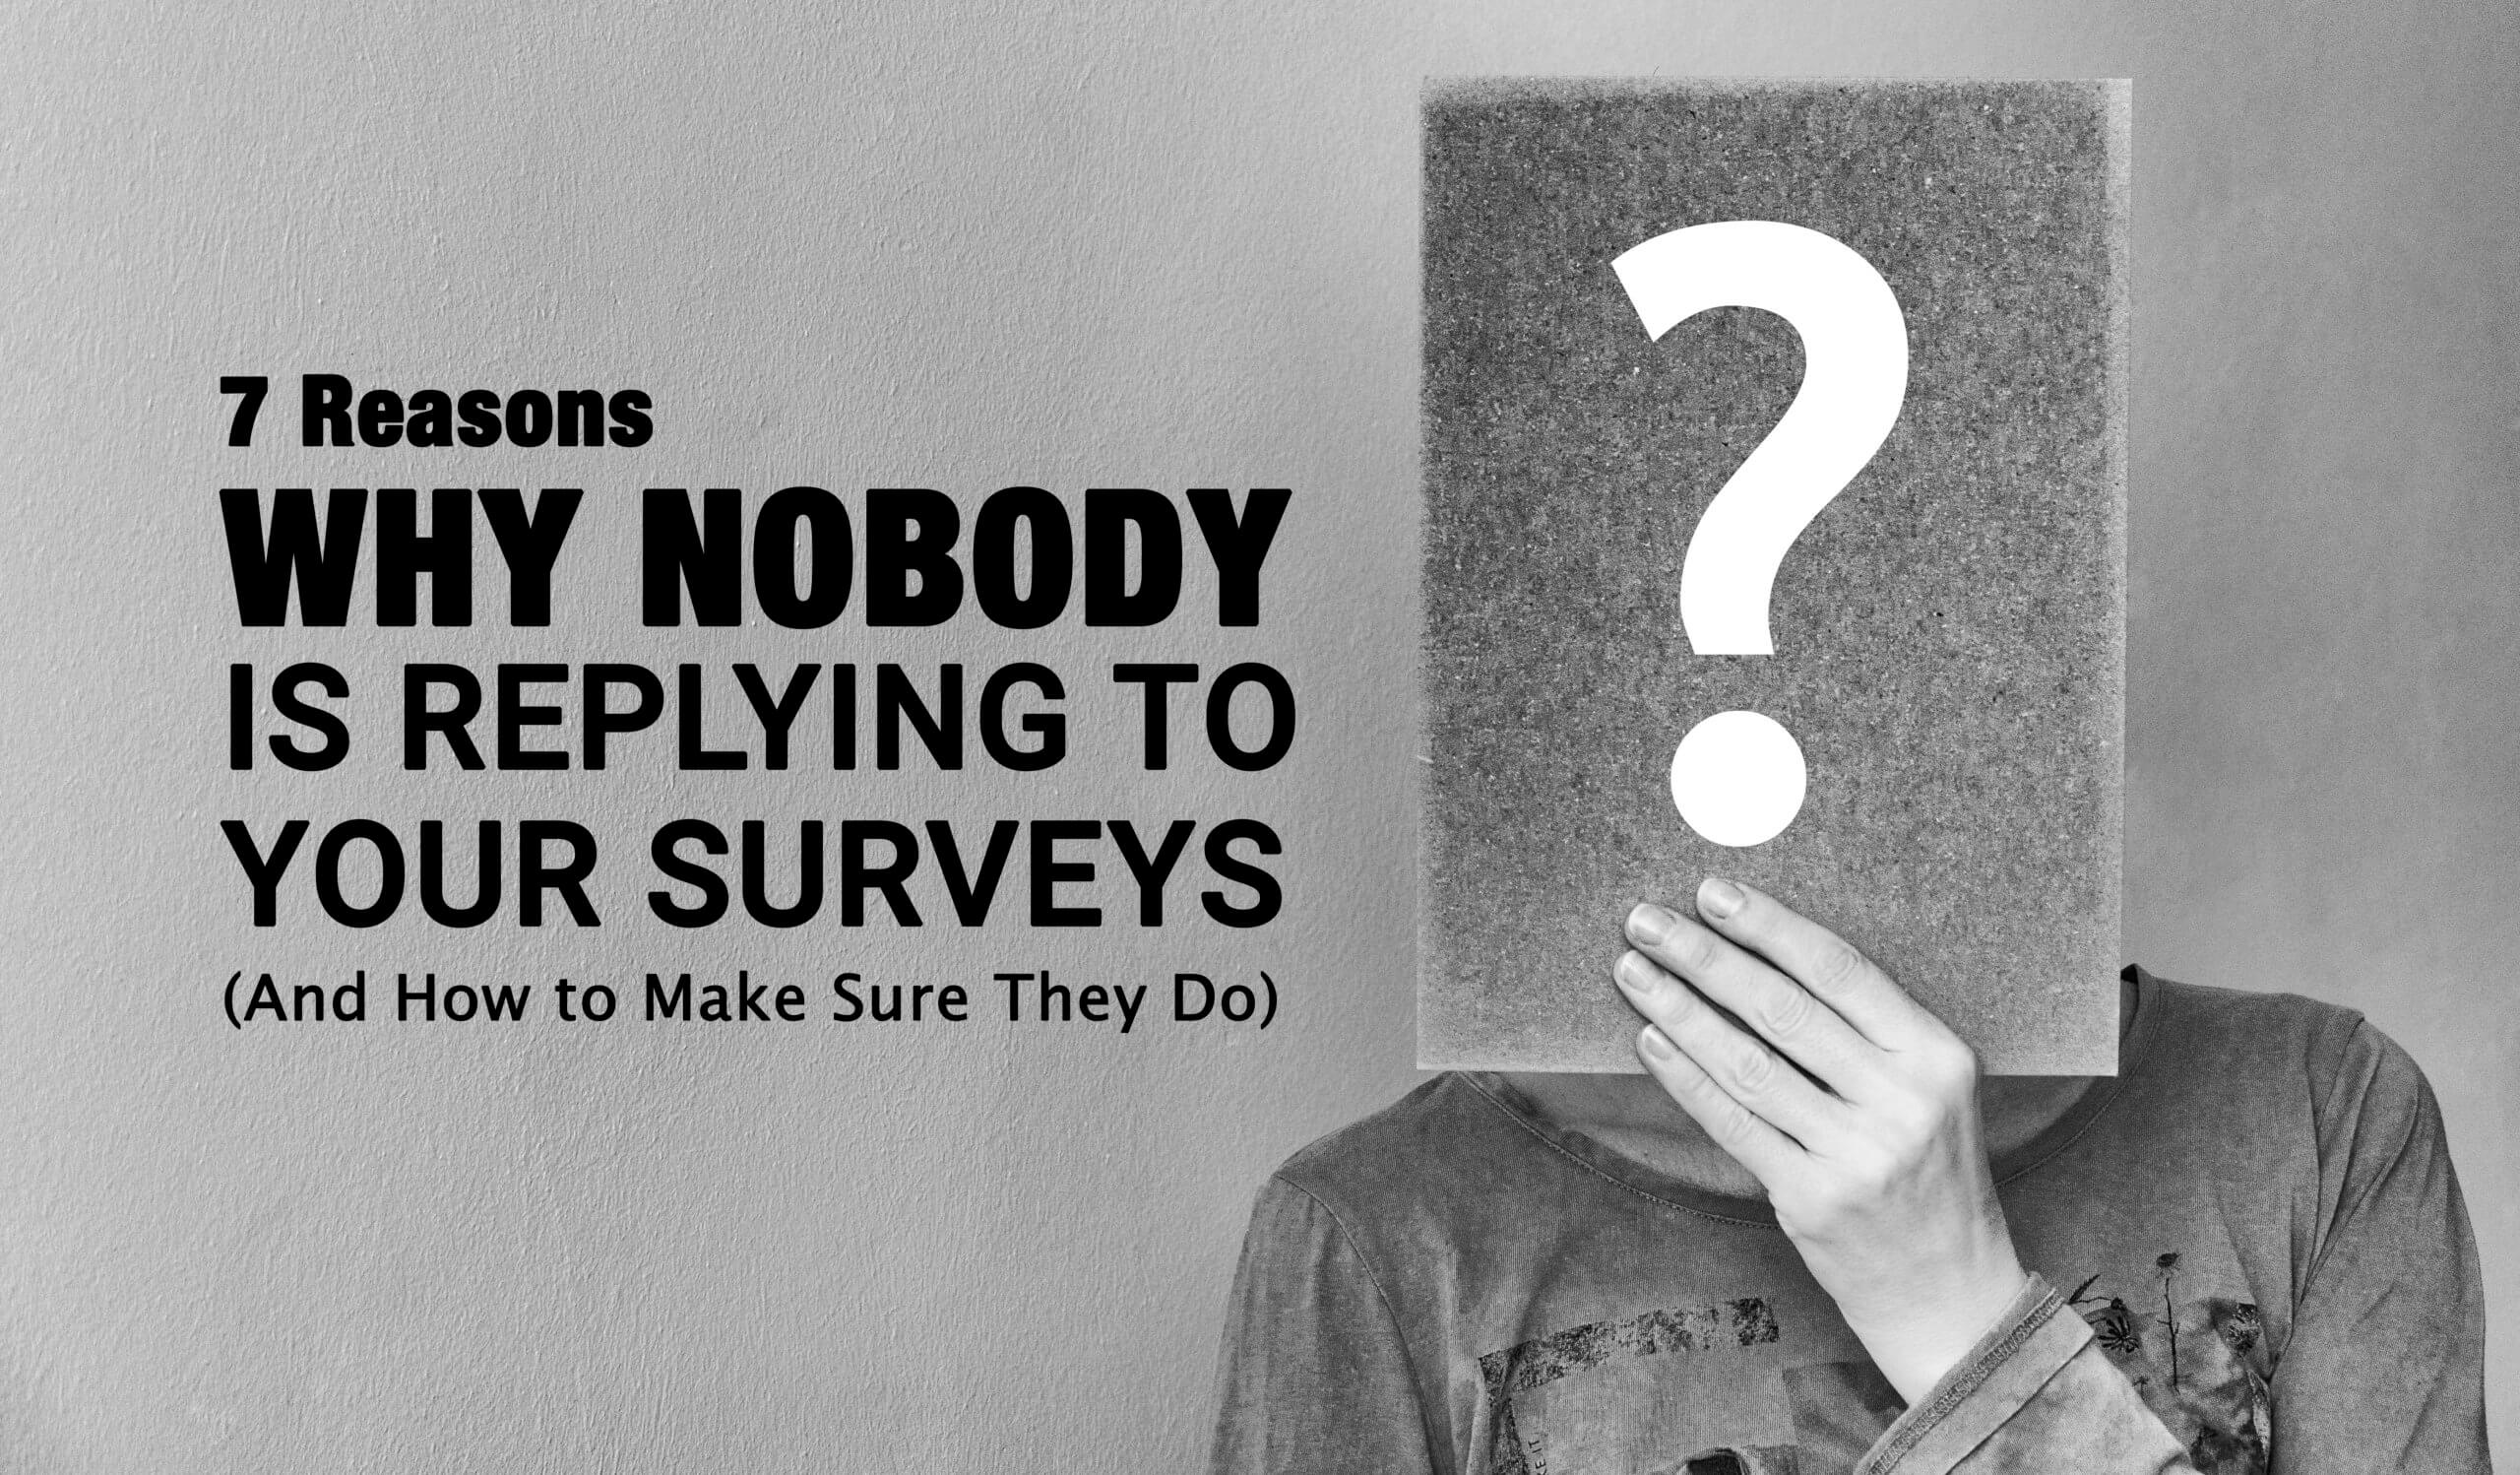 7 Reasons why you don't get enough survey responses